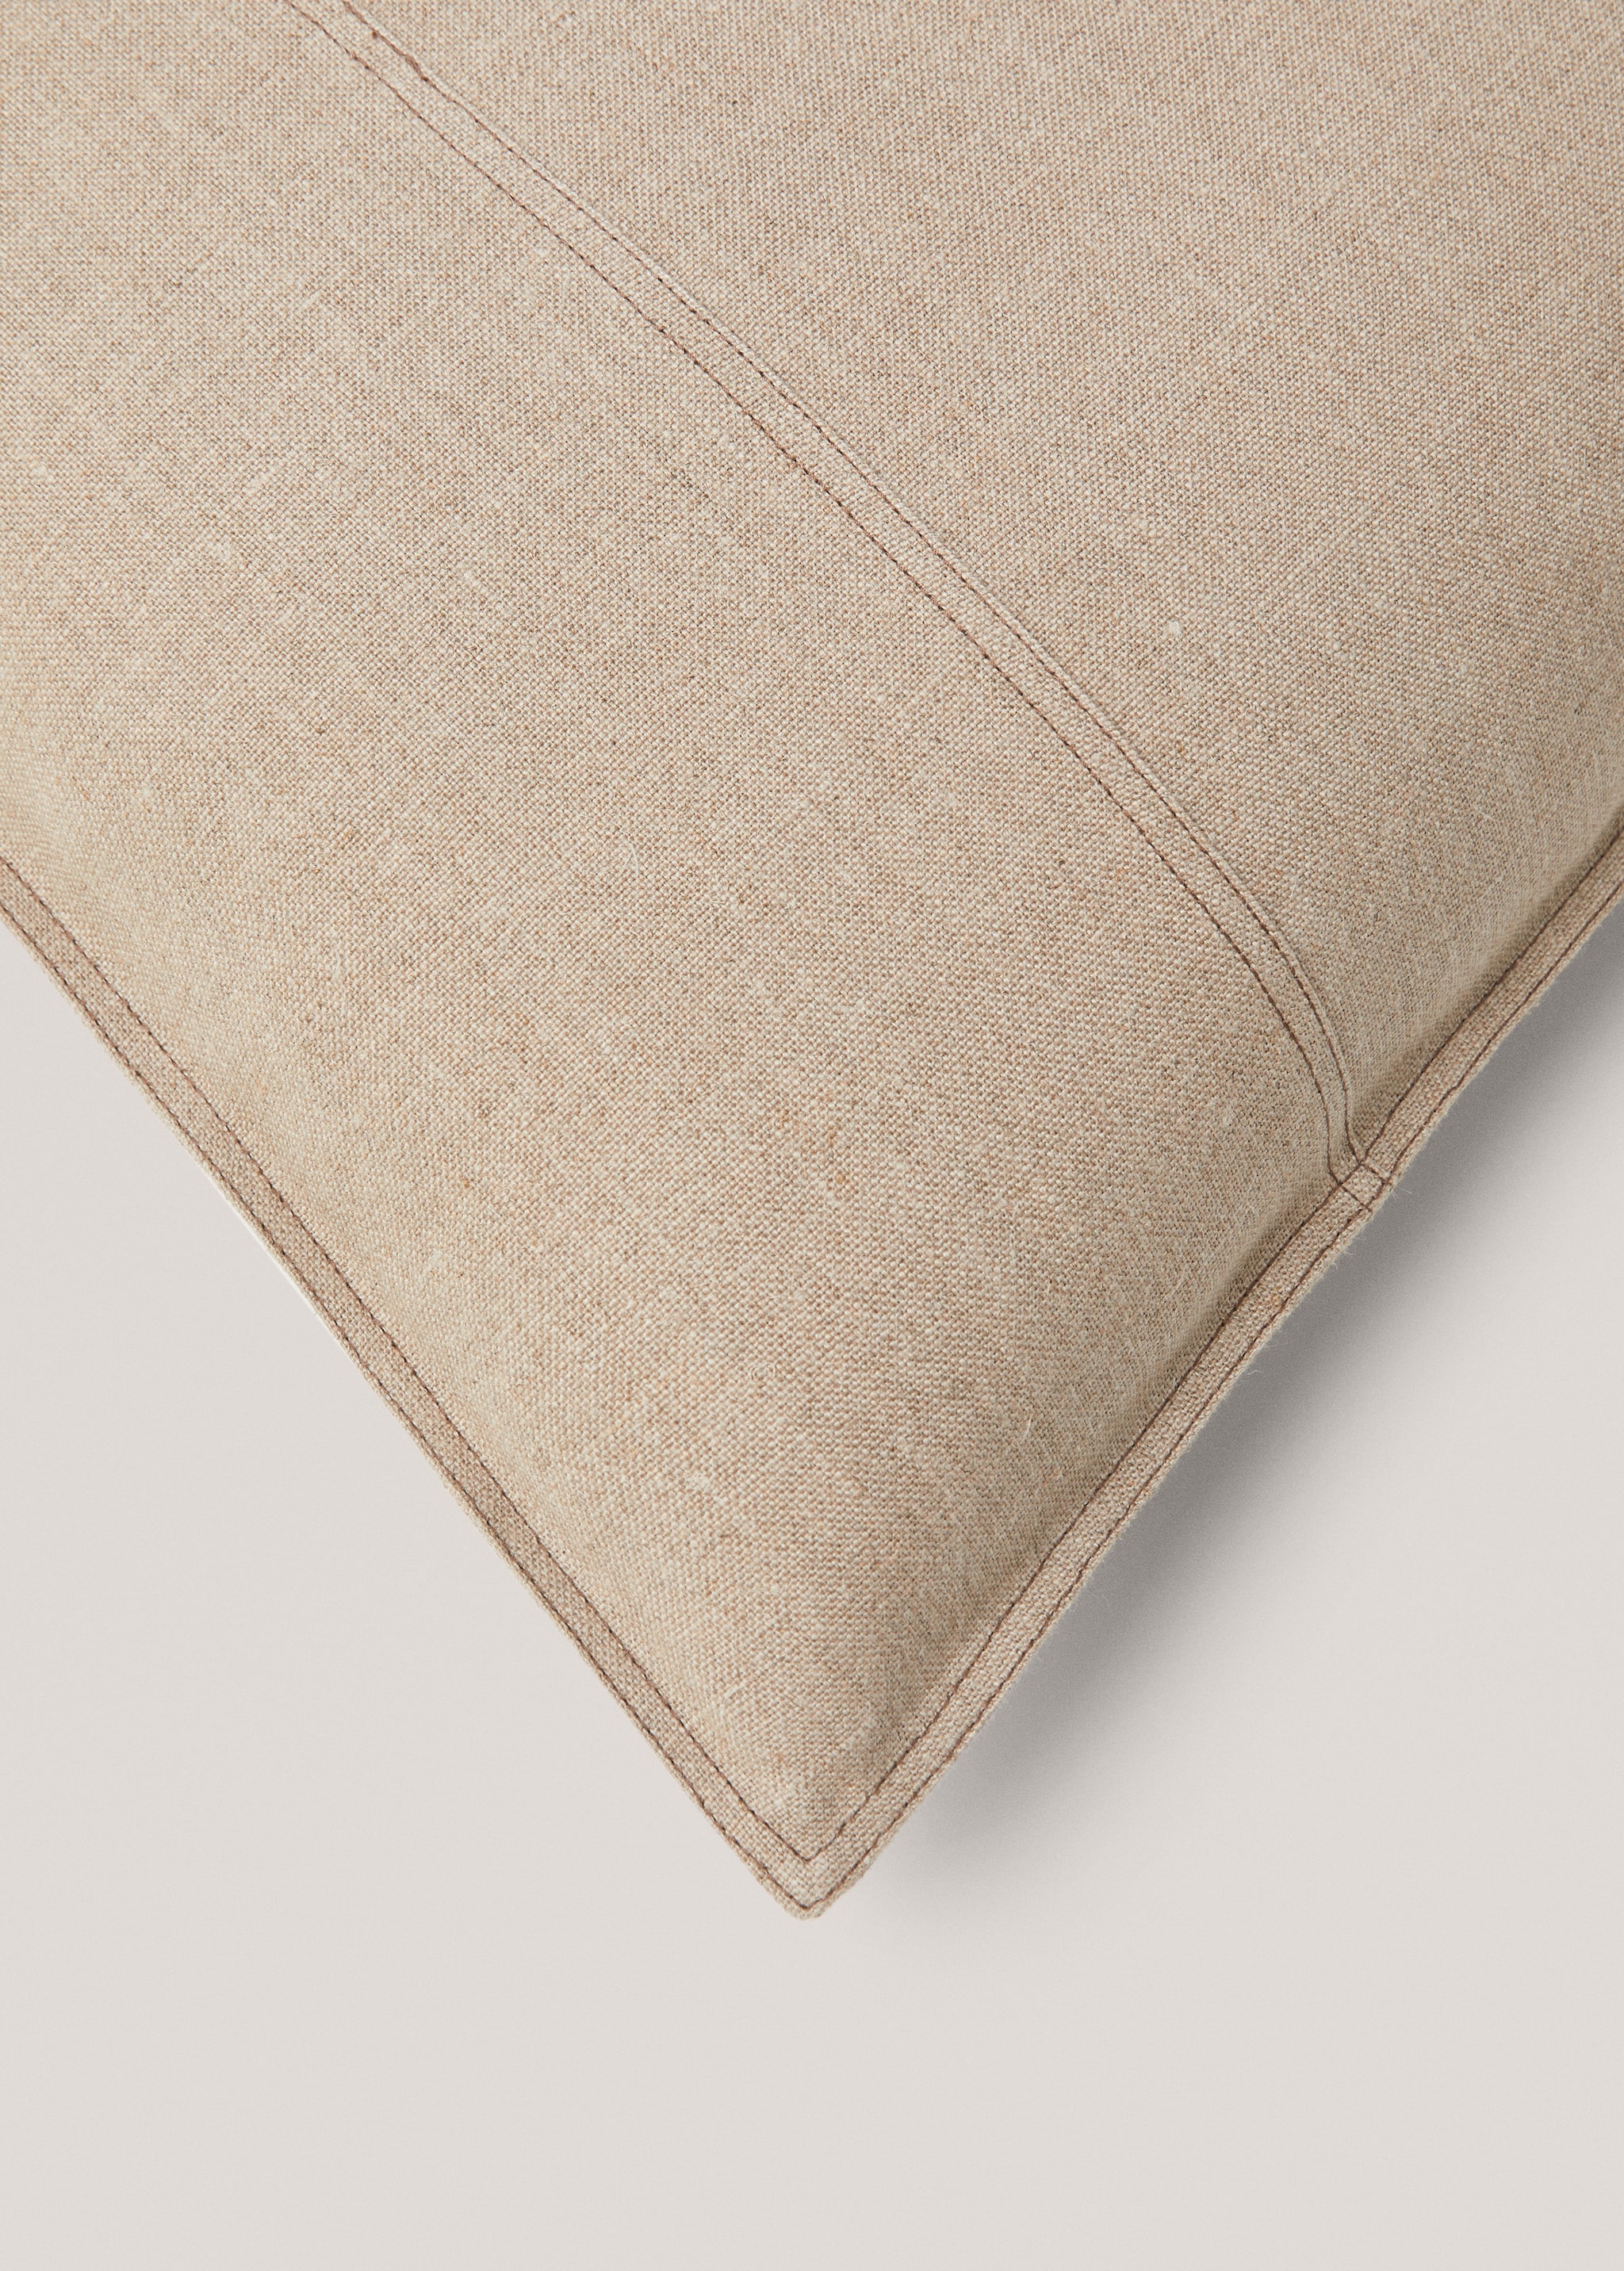 100% linen stitched cushion cover 60x60cm - Details of the article 2